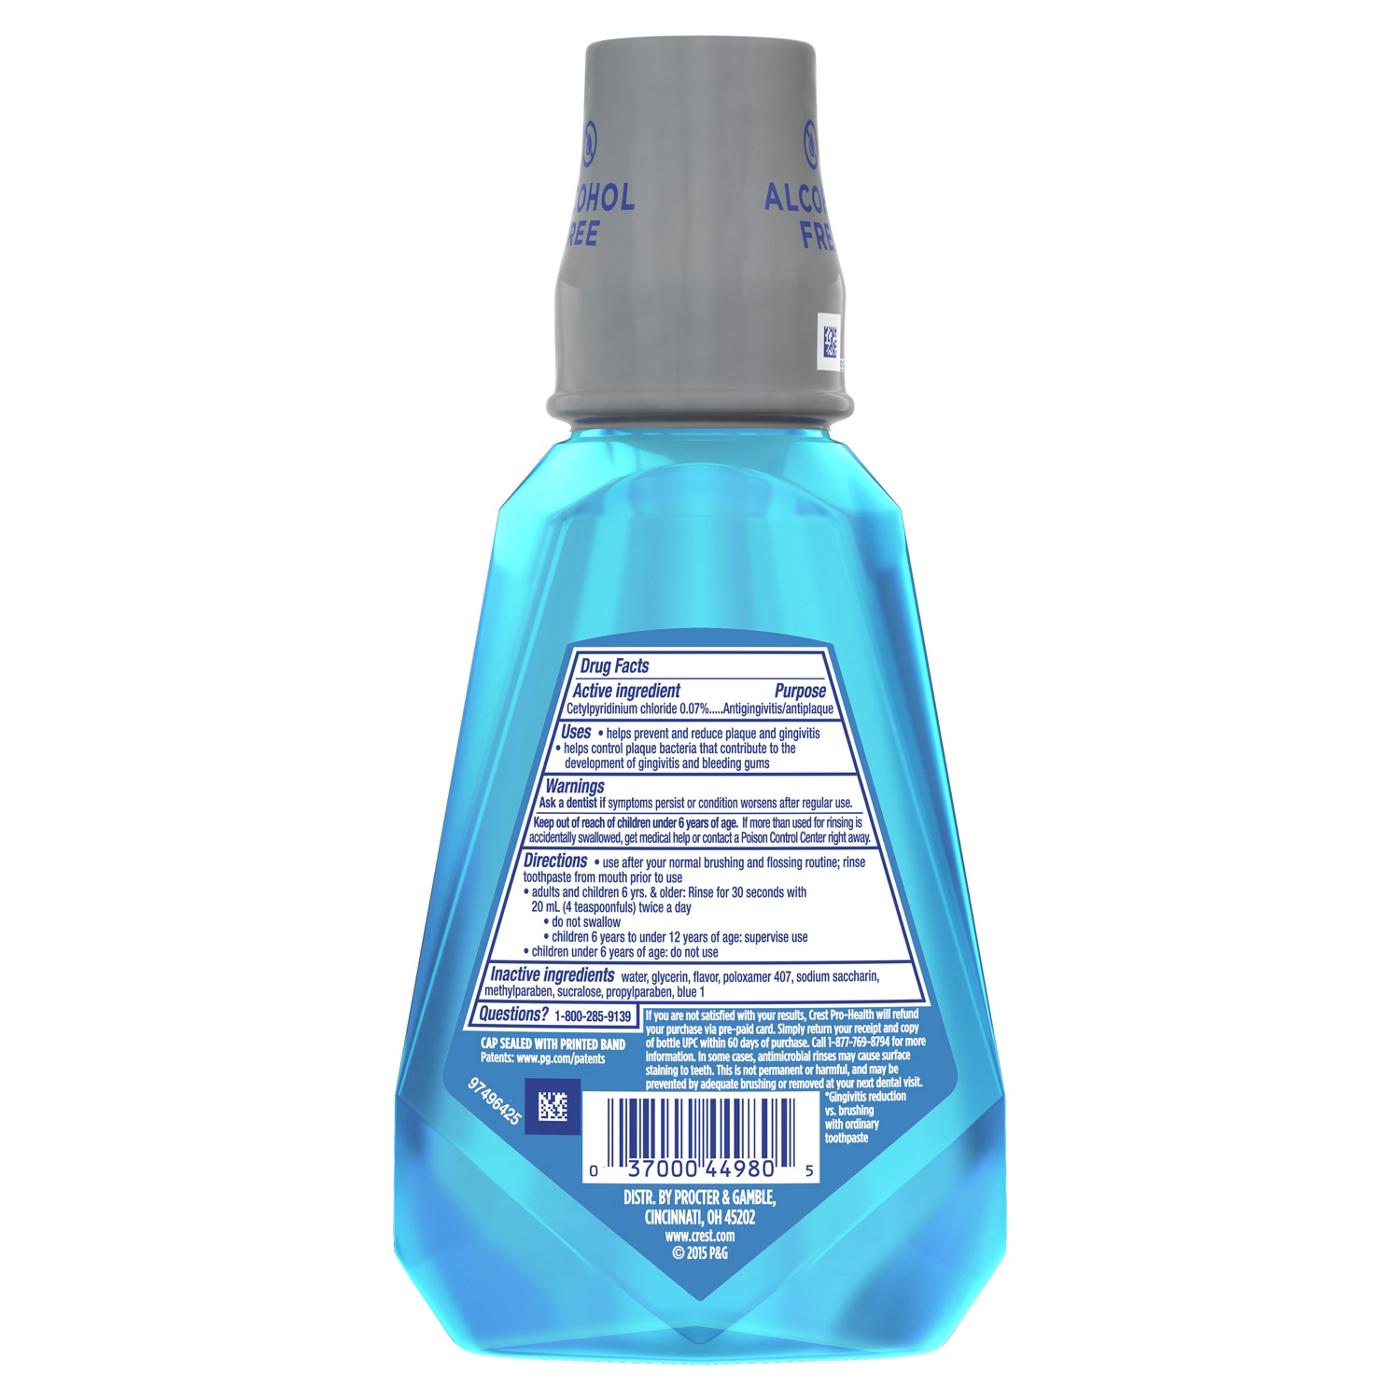 Crest Pro-Health Multi-Protection Mouthwash - Clean Mint; image 2 of 5